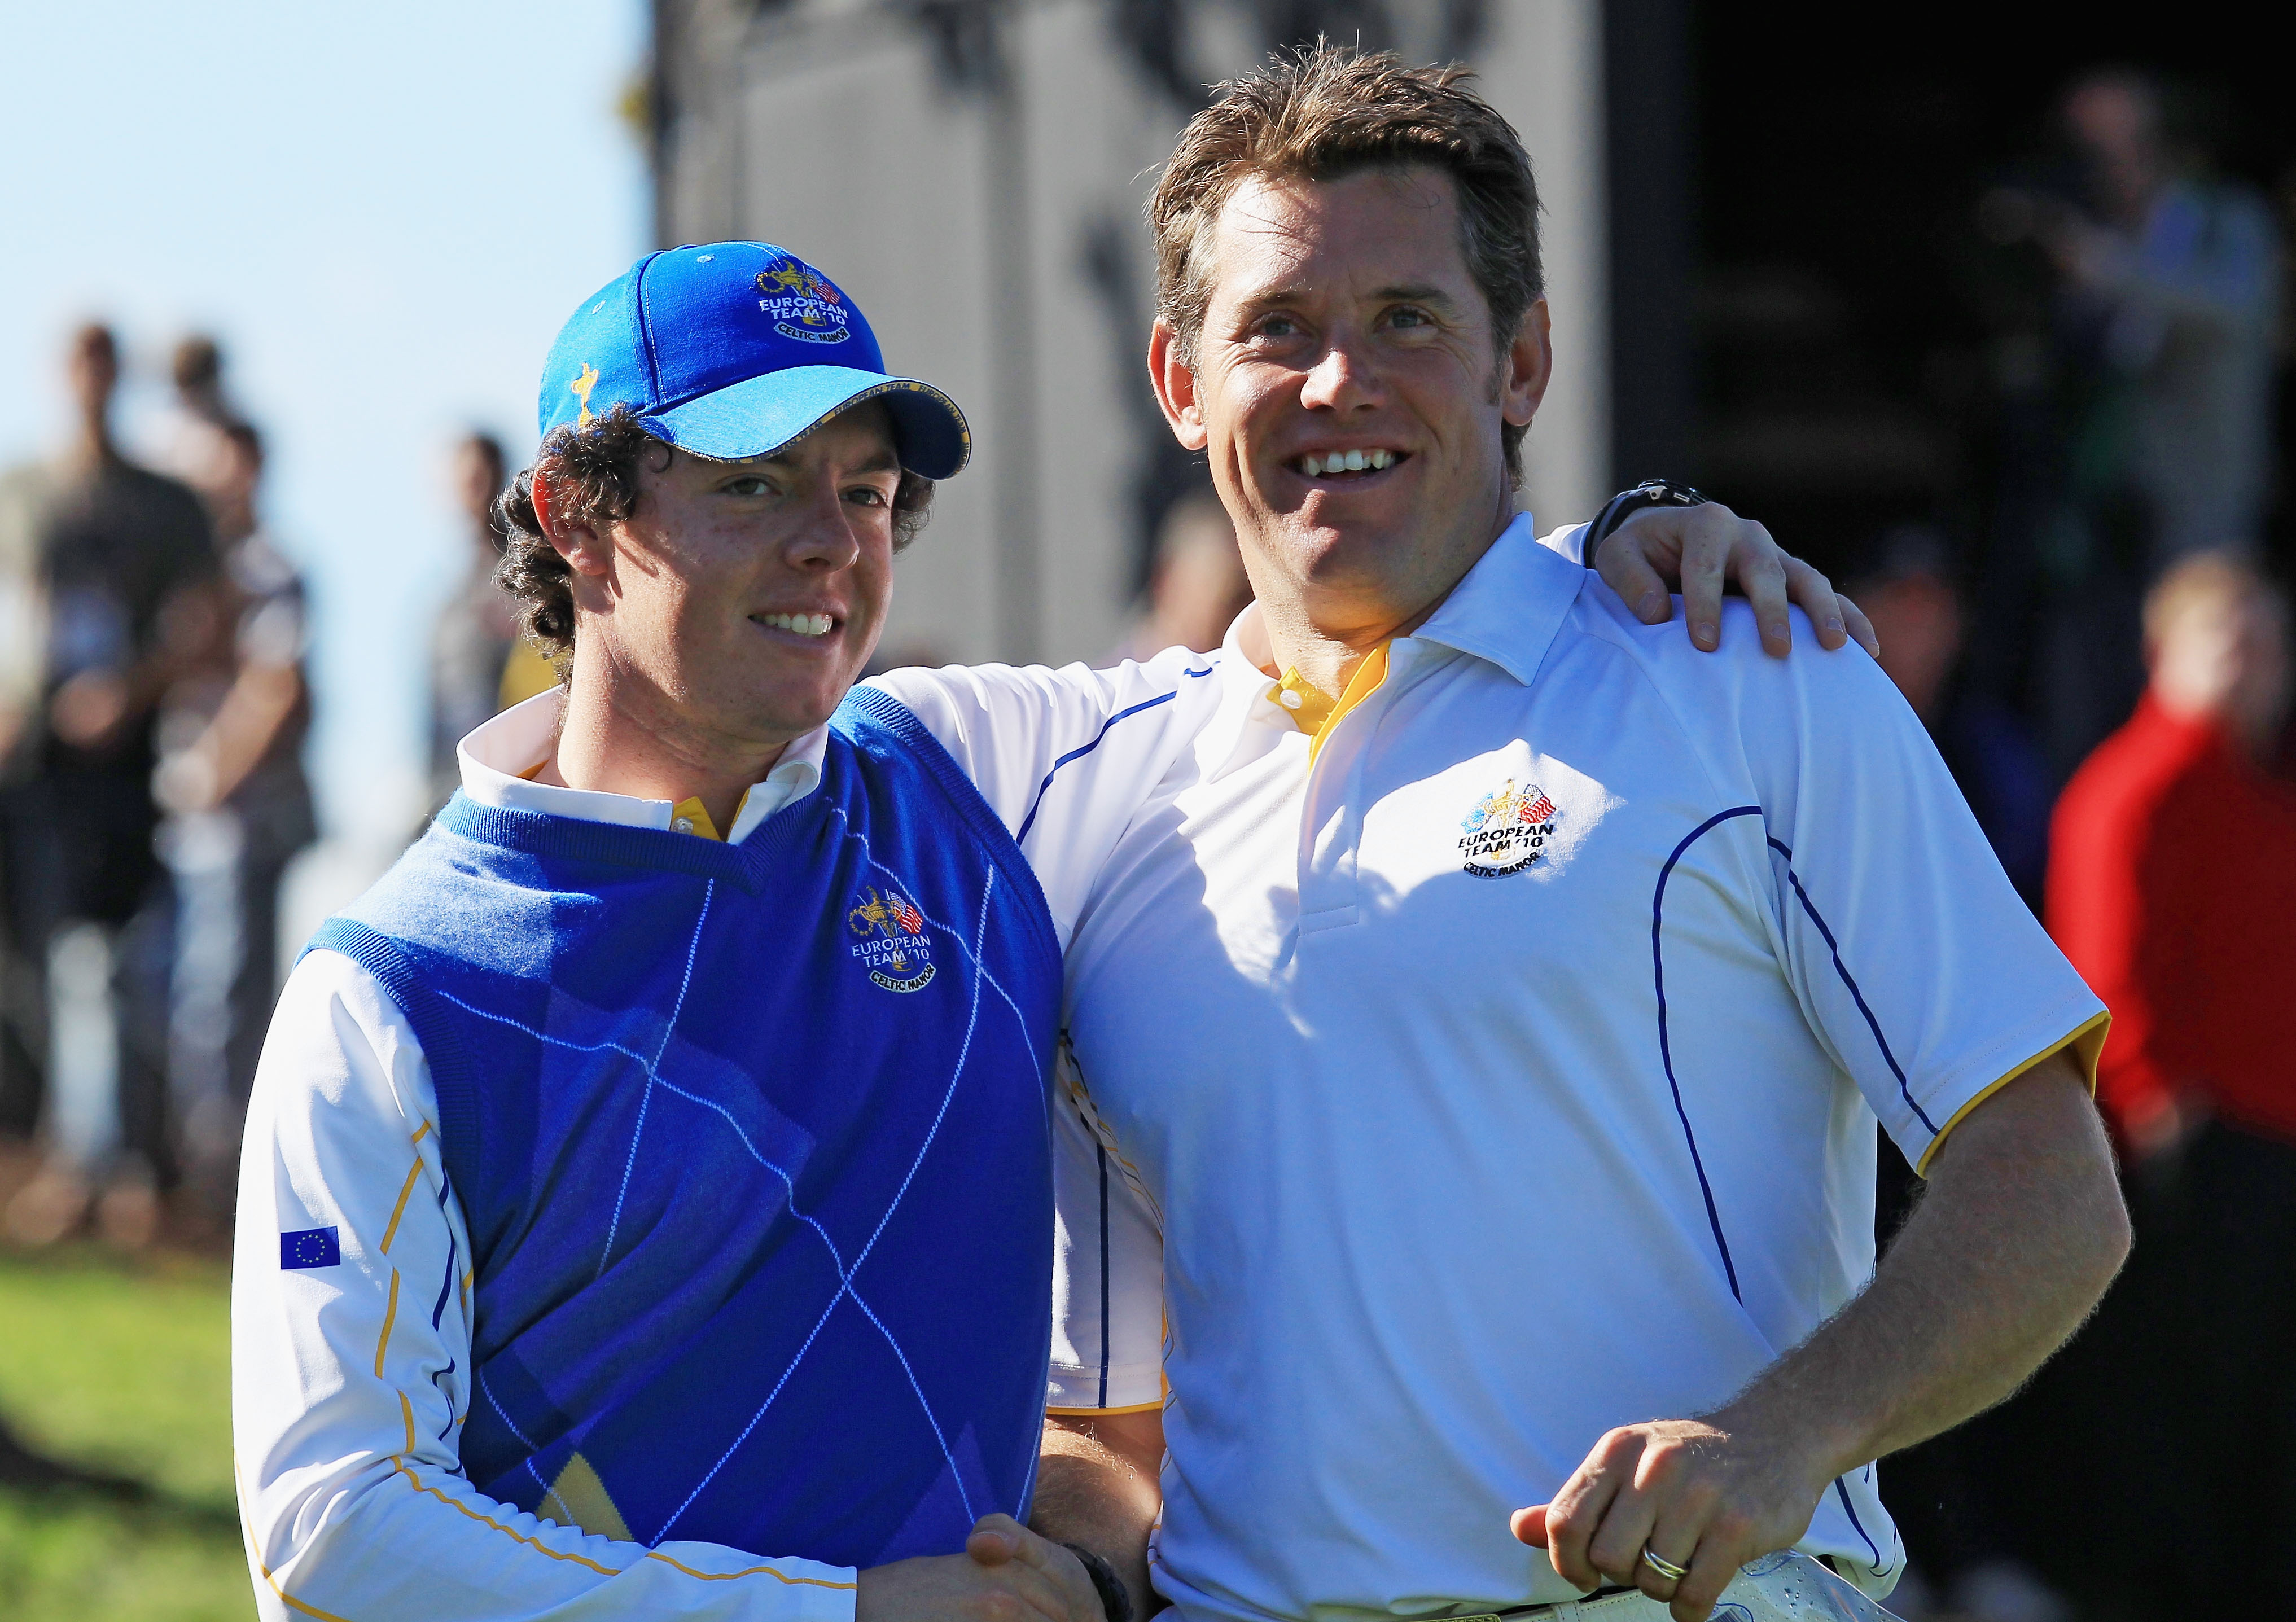 NEWPORT, WALES - OCTOBER 04:  Rory McIlroy of Europe embraces Lee Westwood on the 18th green after he halved his match in the singles matches during the 2010 Ryder Cup at the Celtic Manor Resort on October 4, 2010 in Newport, Wales.  (Photo by David Canno